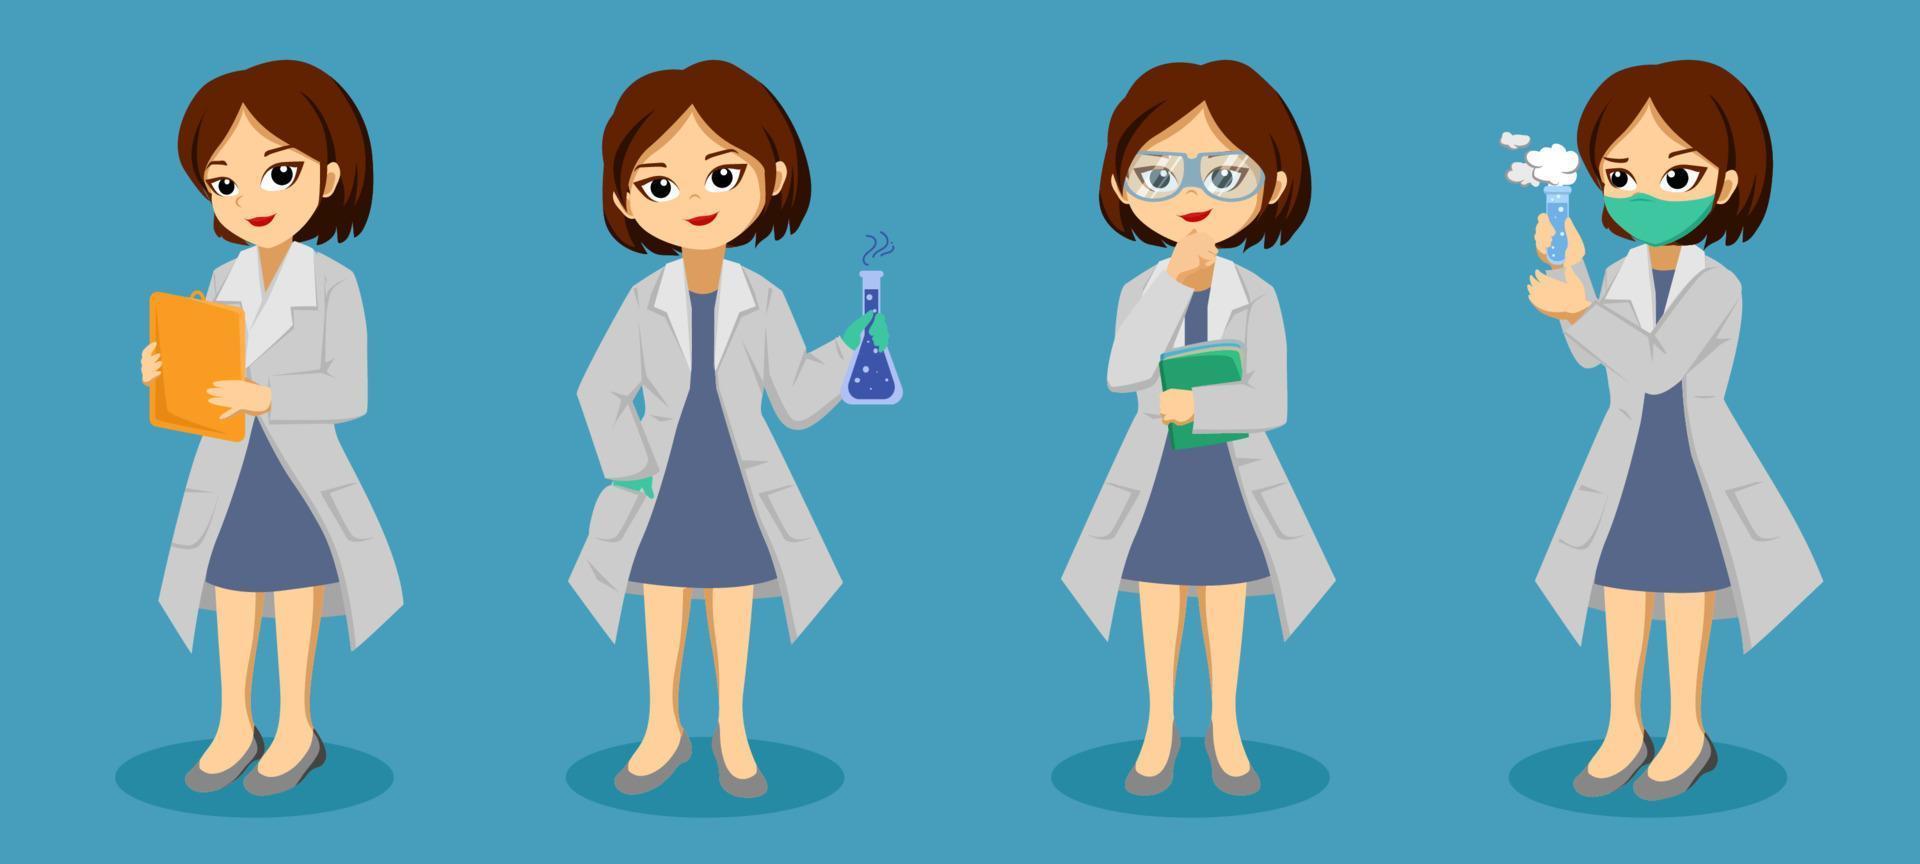 Woman Scientist Character Collection Concept vector